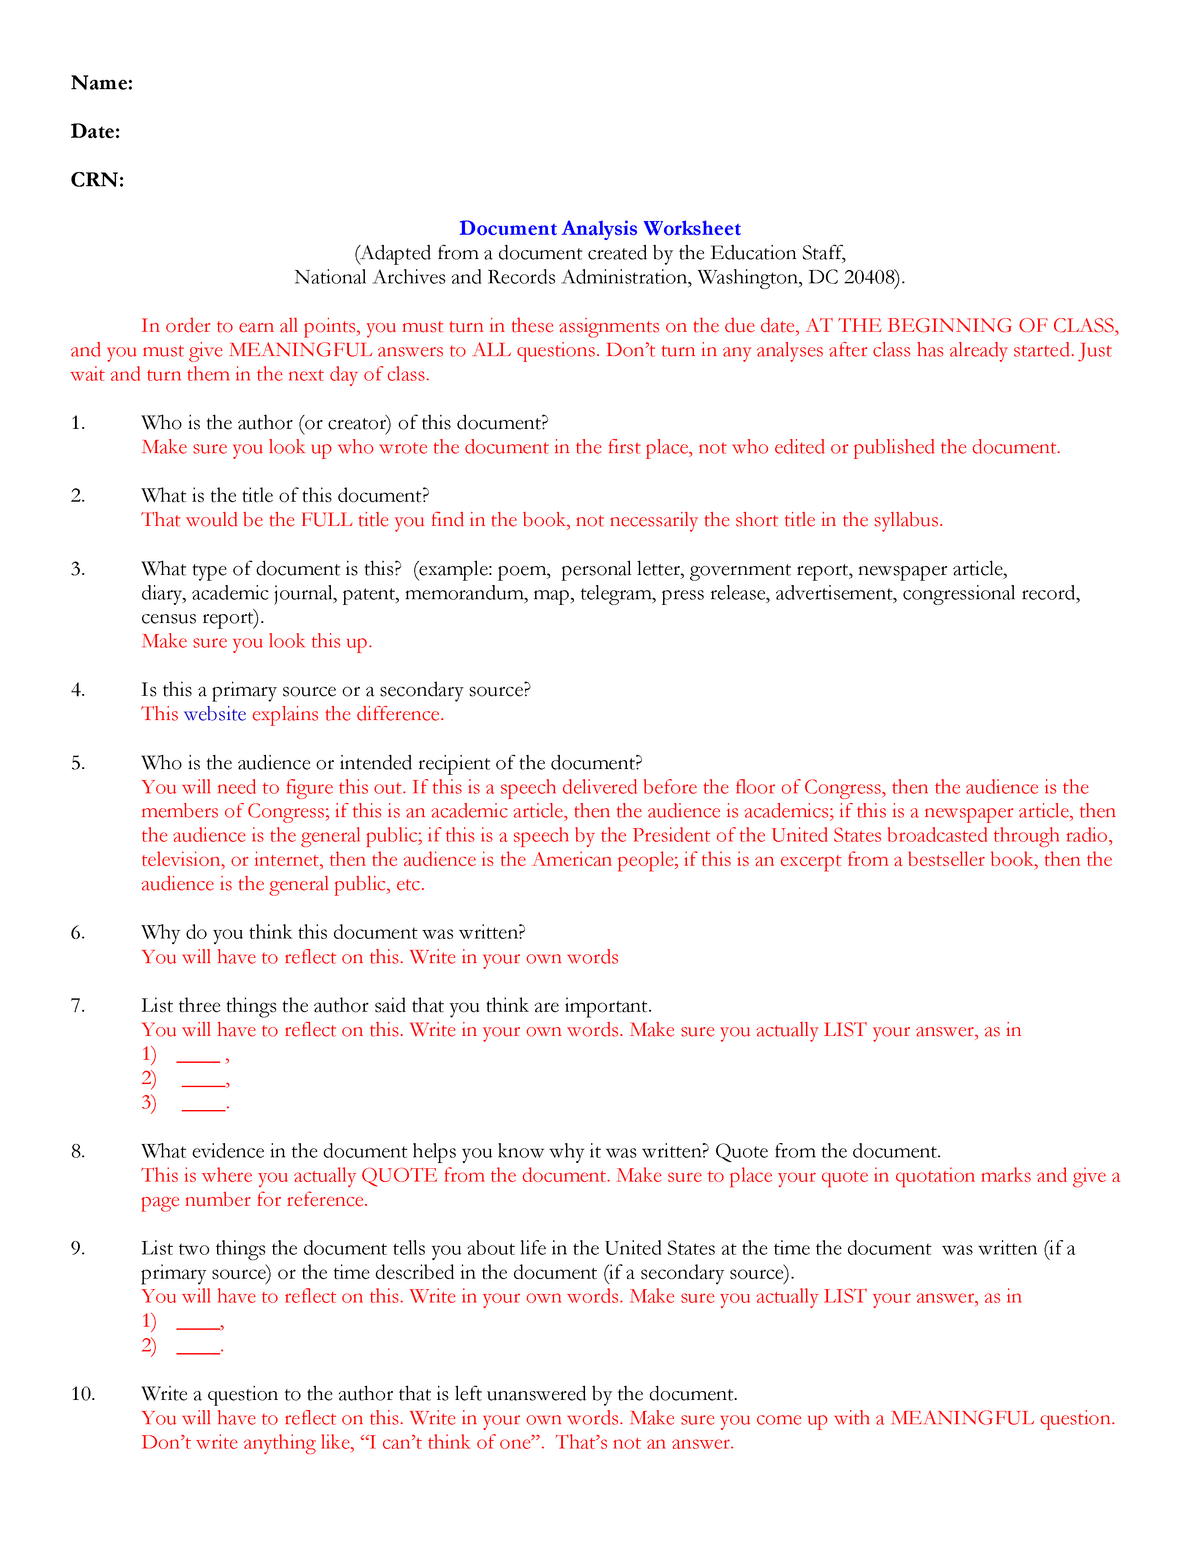 Guidelines - Document Analysis Worksheet - Name: Date: CRN Within Written Document Analysis Worksheet Answers